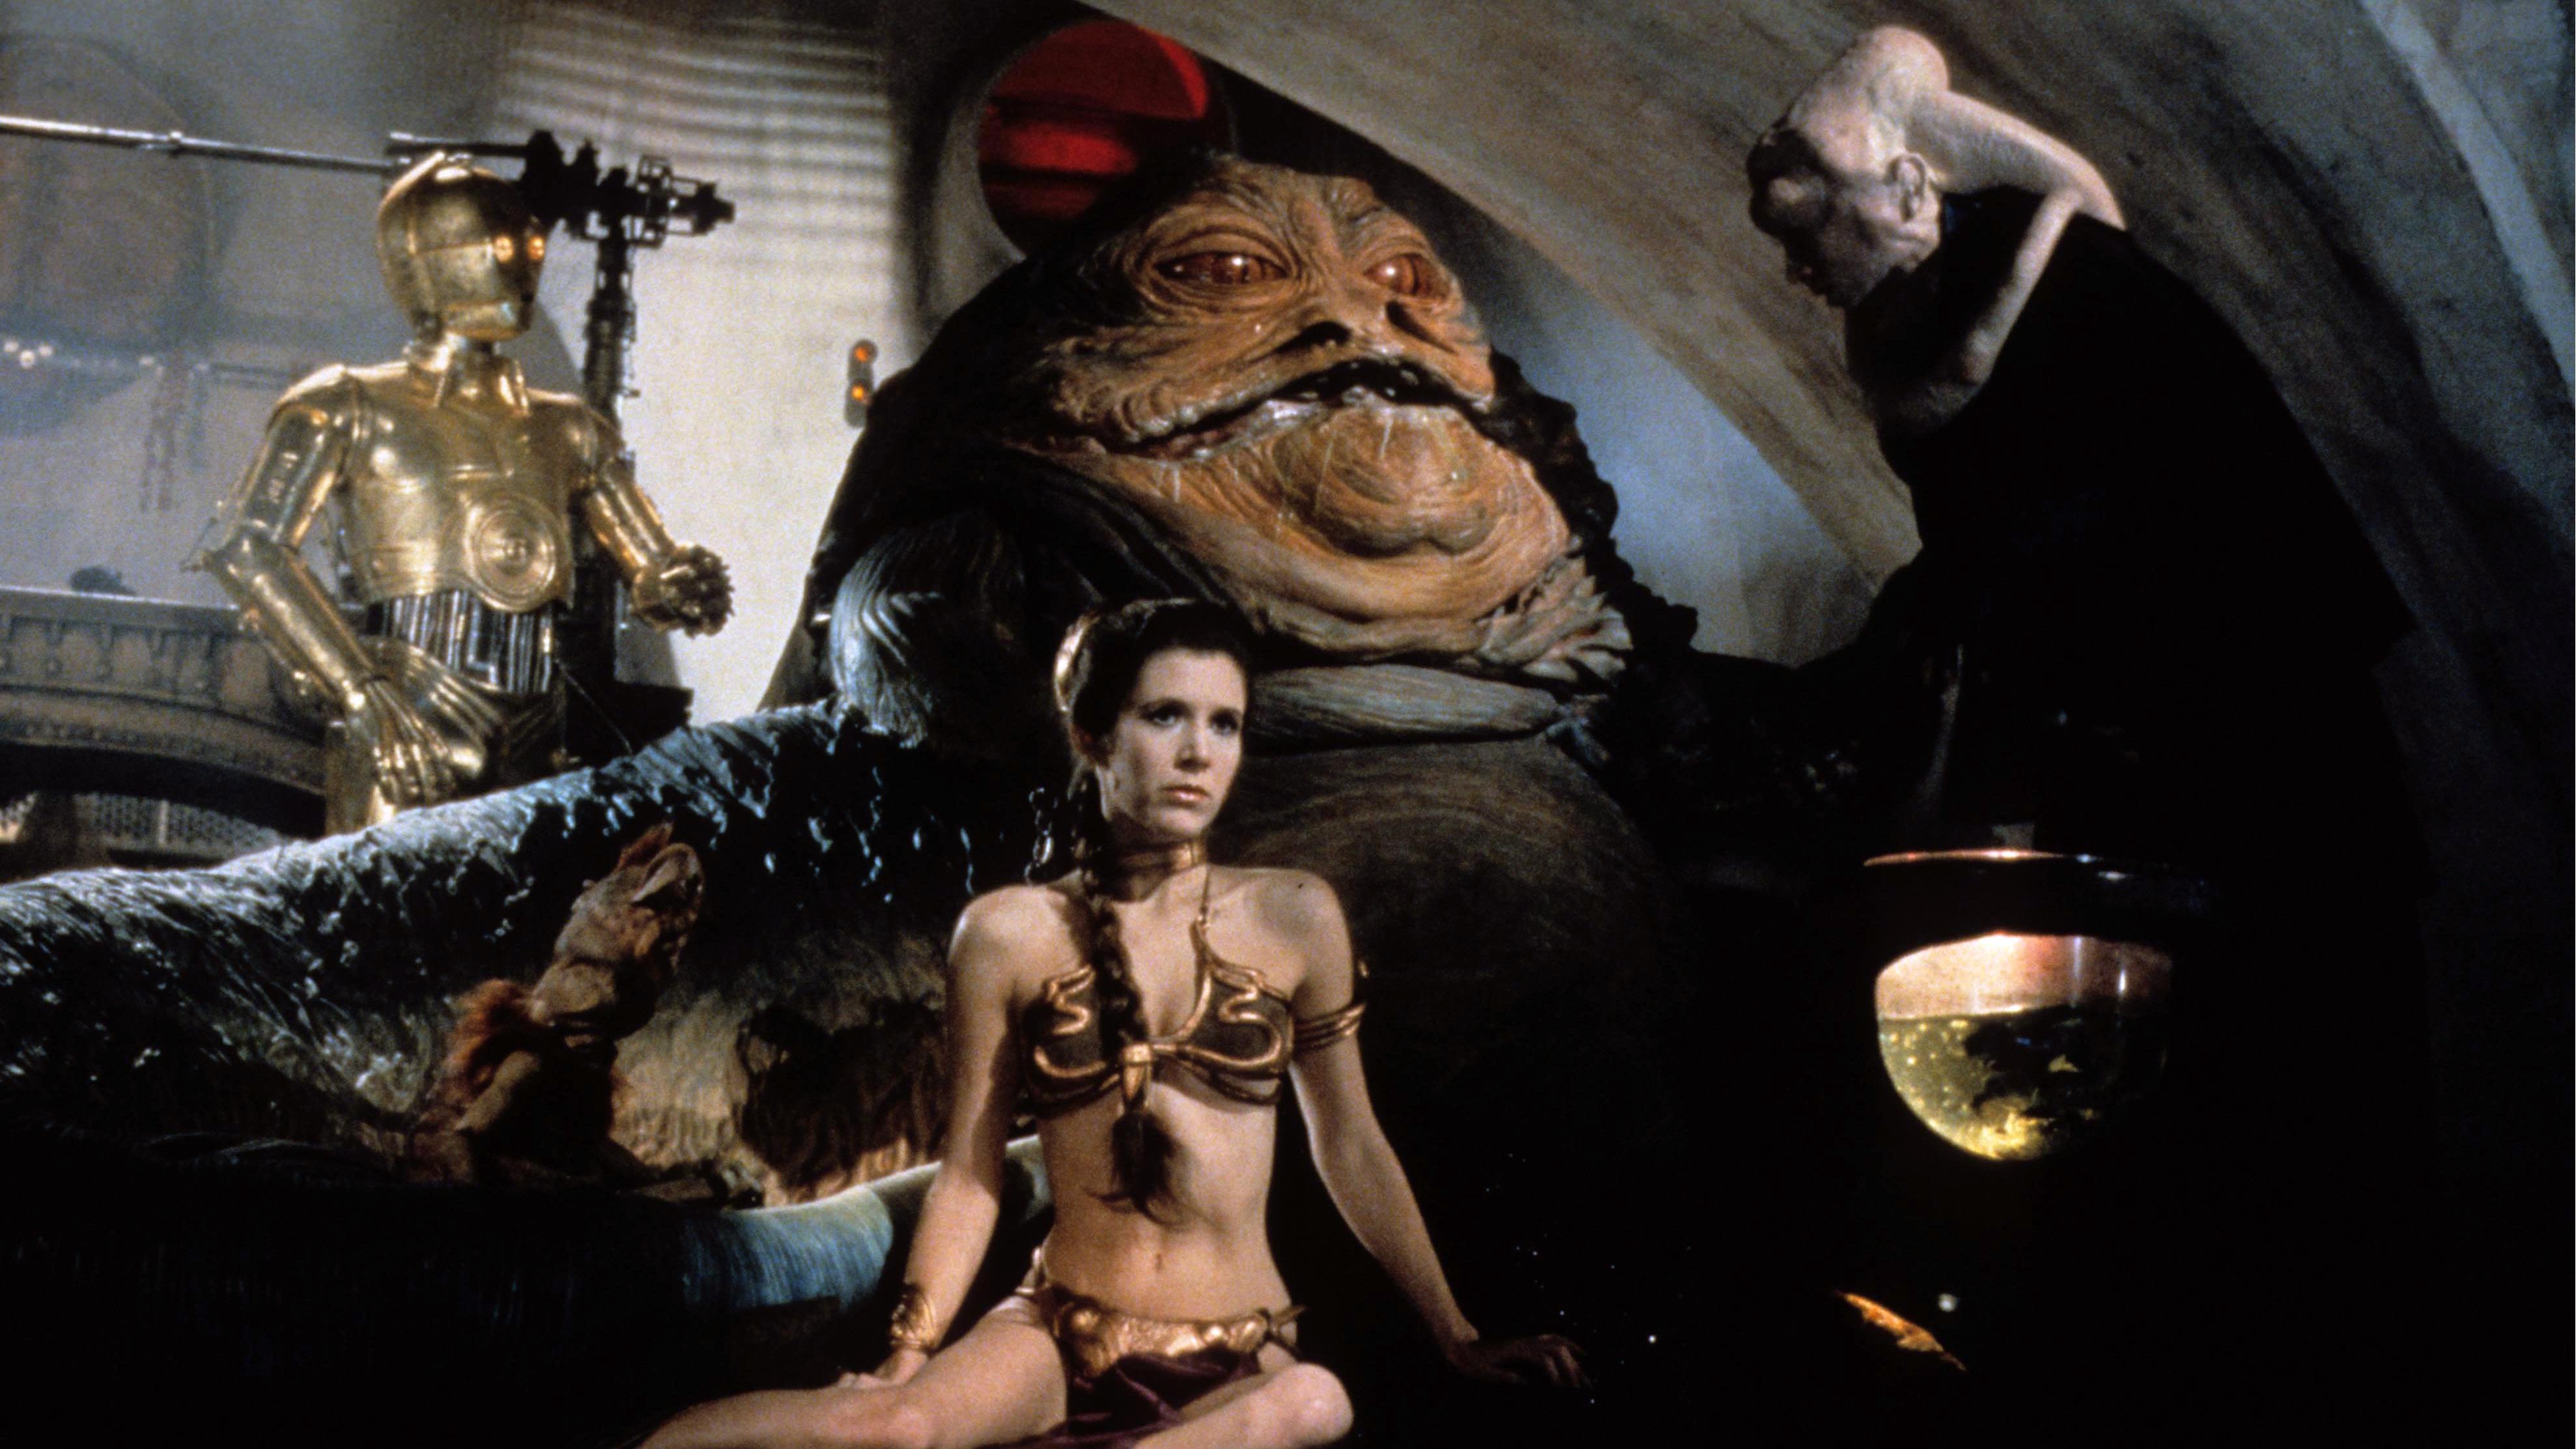 The infamous scene with Princess Leia (Carrie Fisher) as a slave girl to Jabba the Hut with C3P0 in the background (l) in Star Wars Episode VI Return of the Jedi (1983)